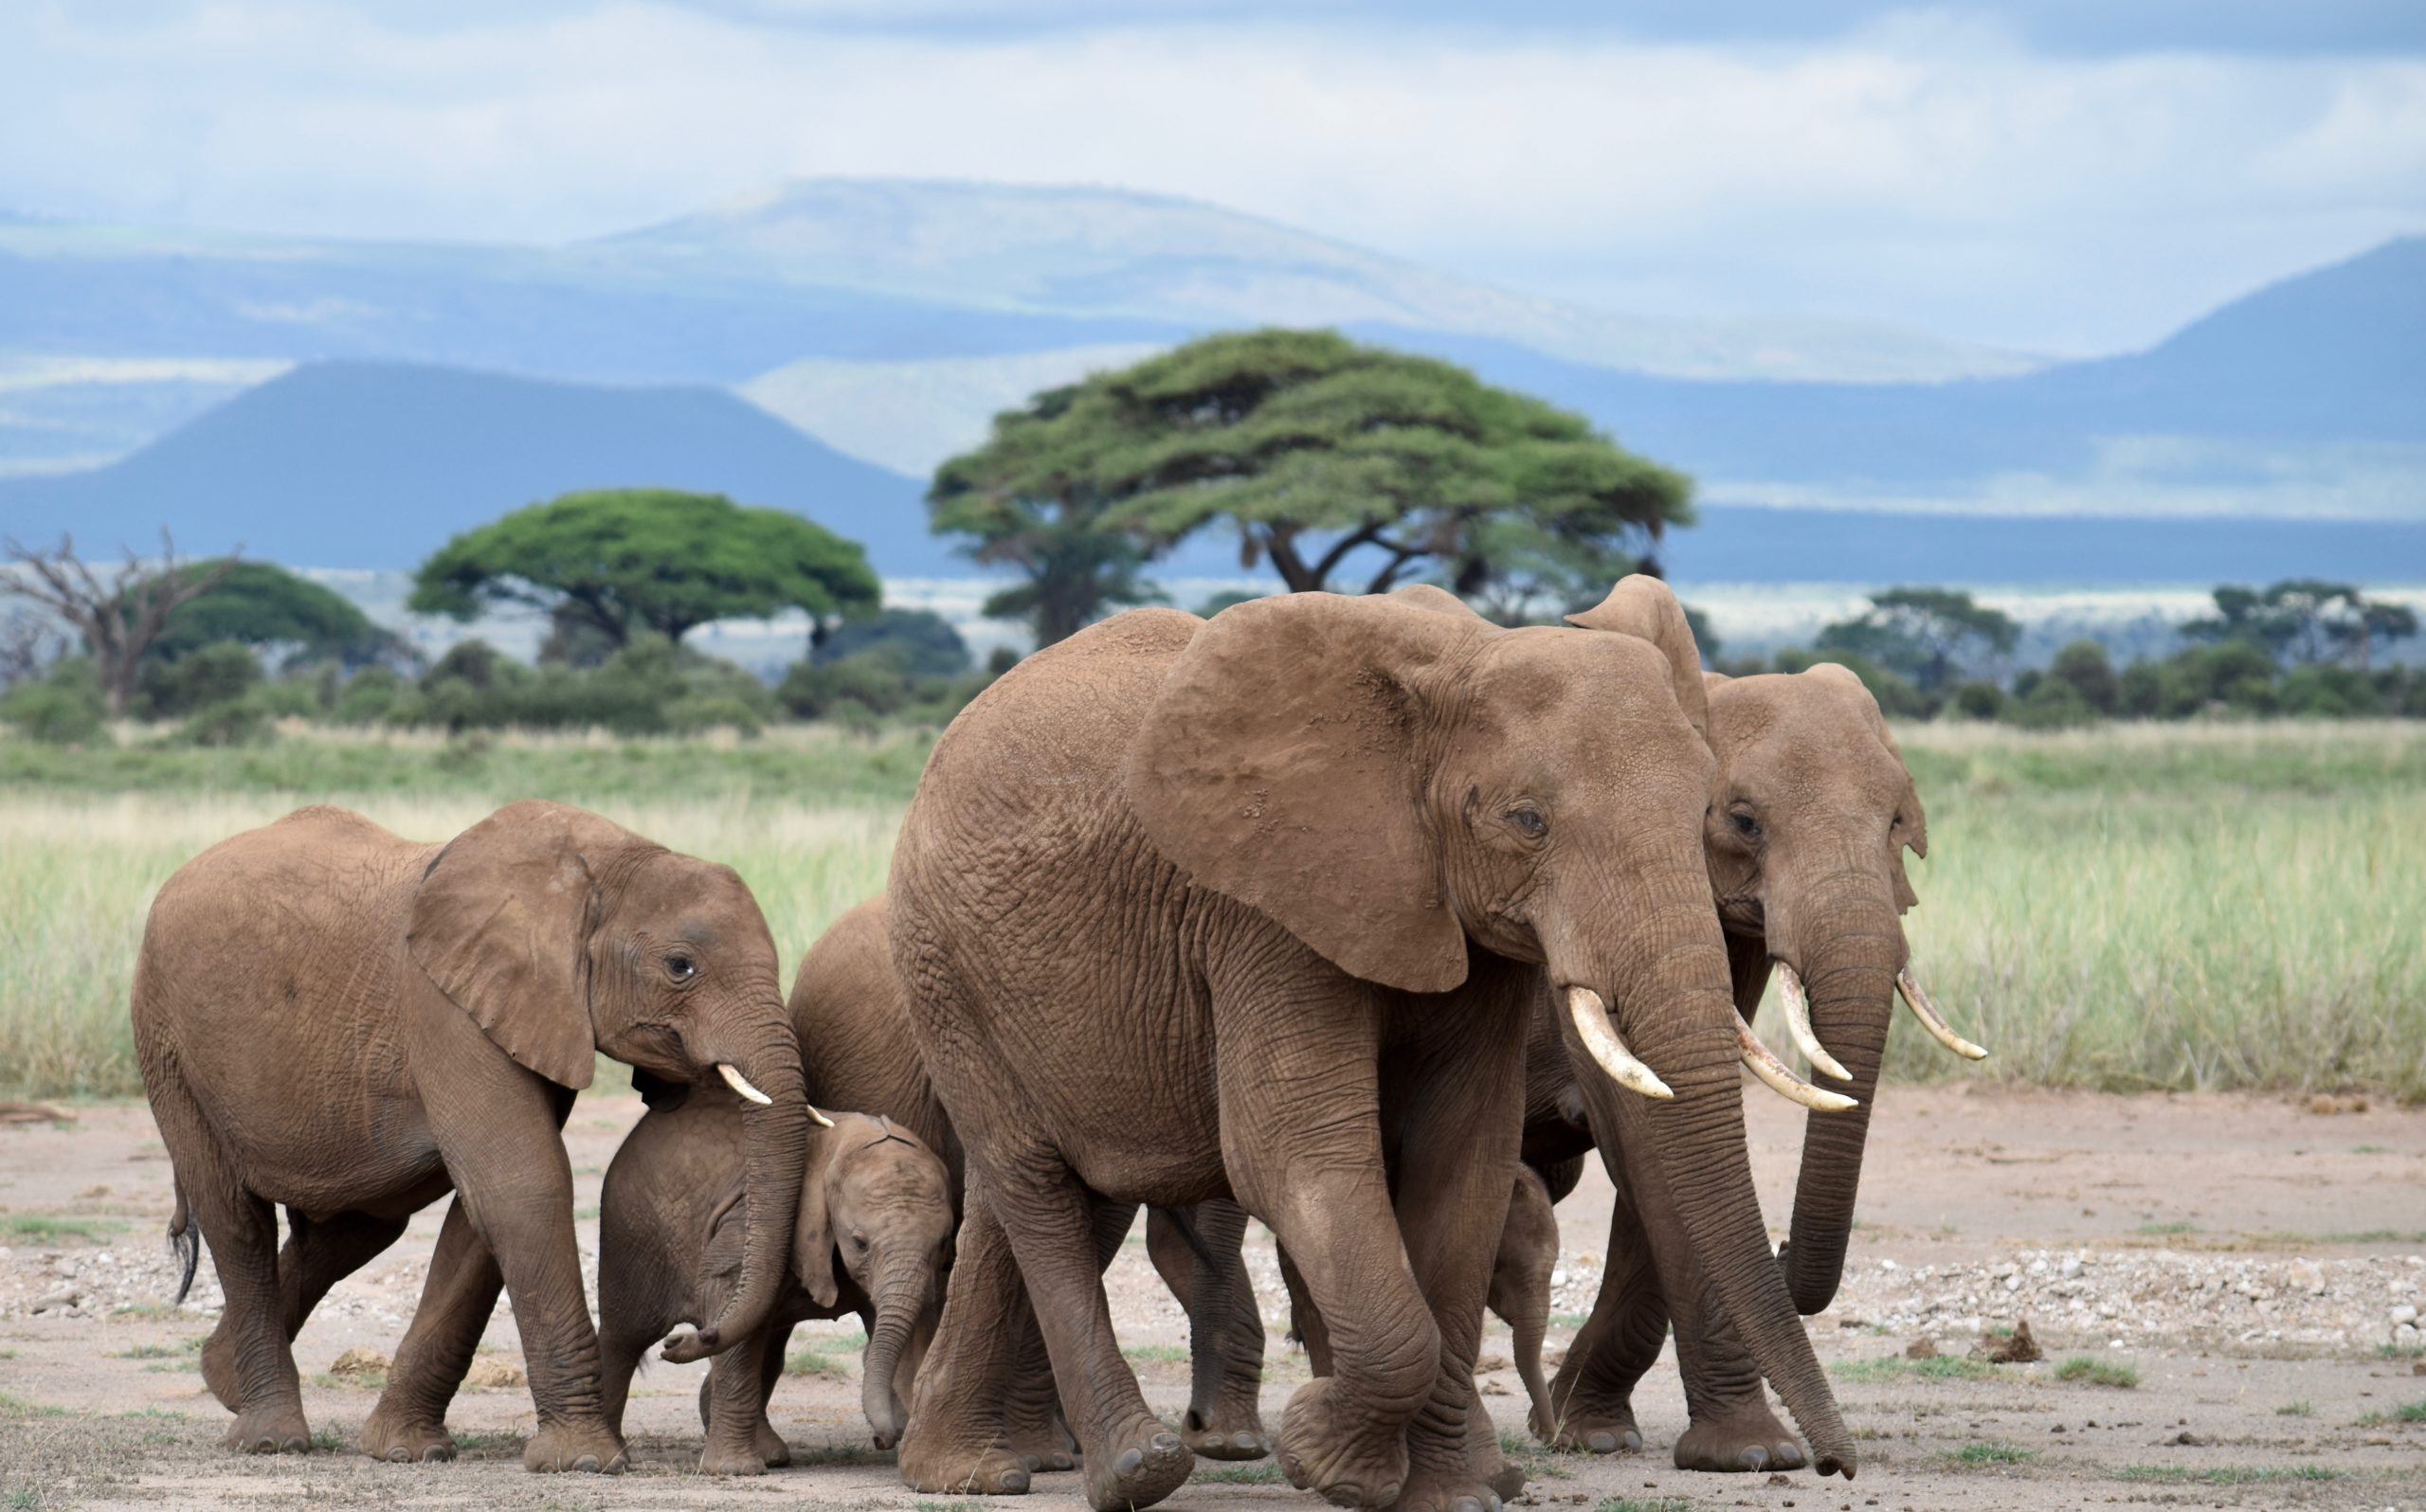 An elephant family on its daily march to the swamps in Amboseli National Park, Kenya